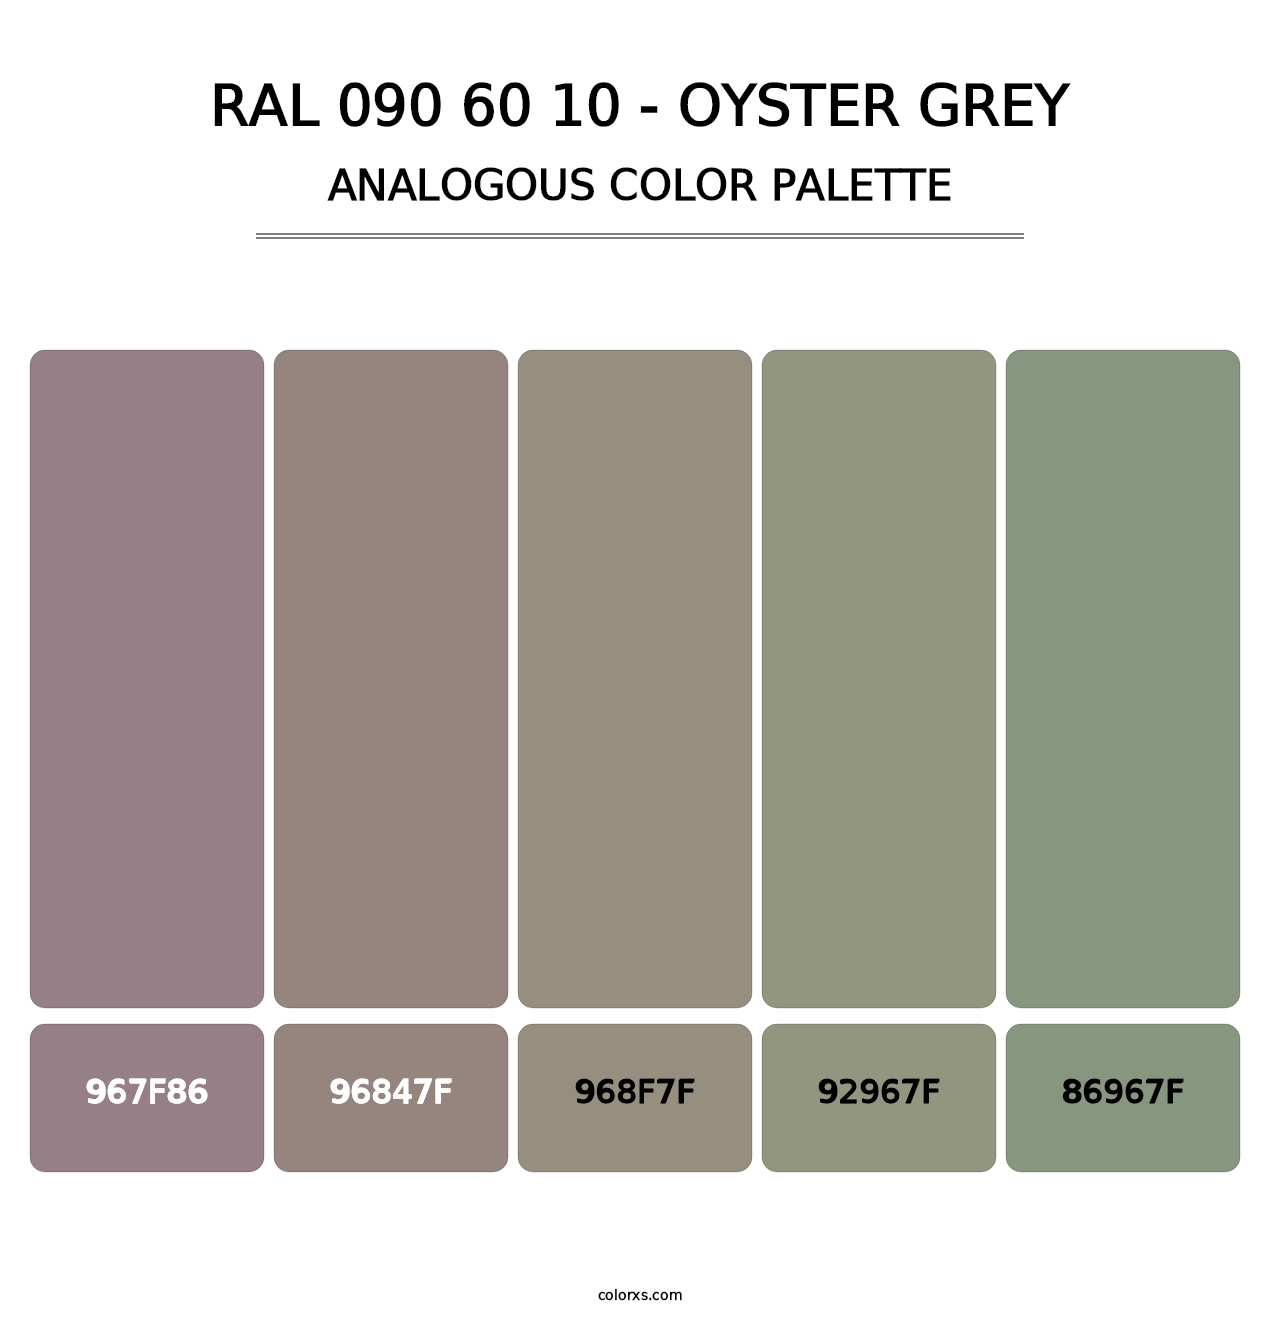 RAL 090 60 10 - Oyster Grey - Analogous Color Palette